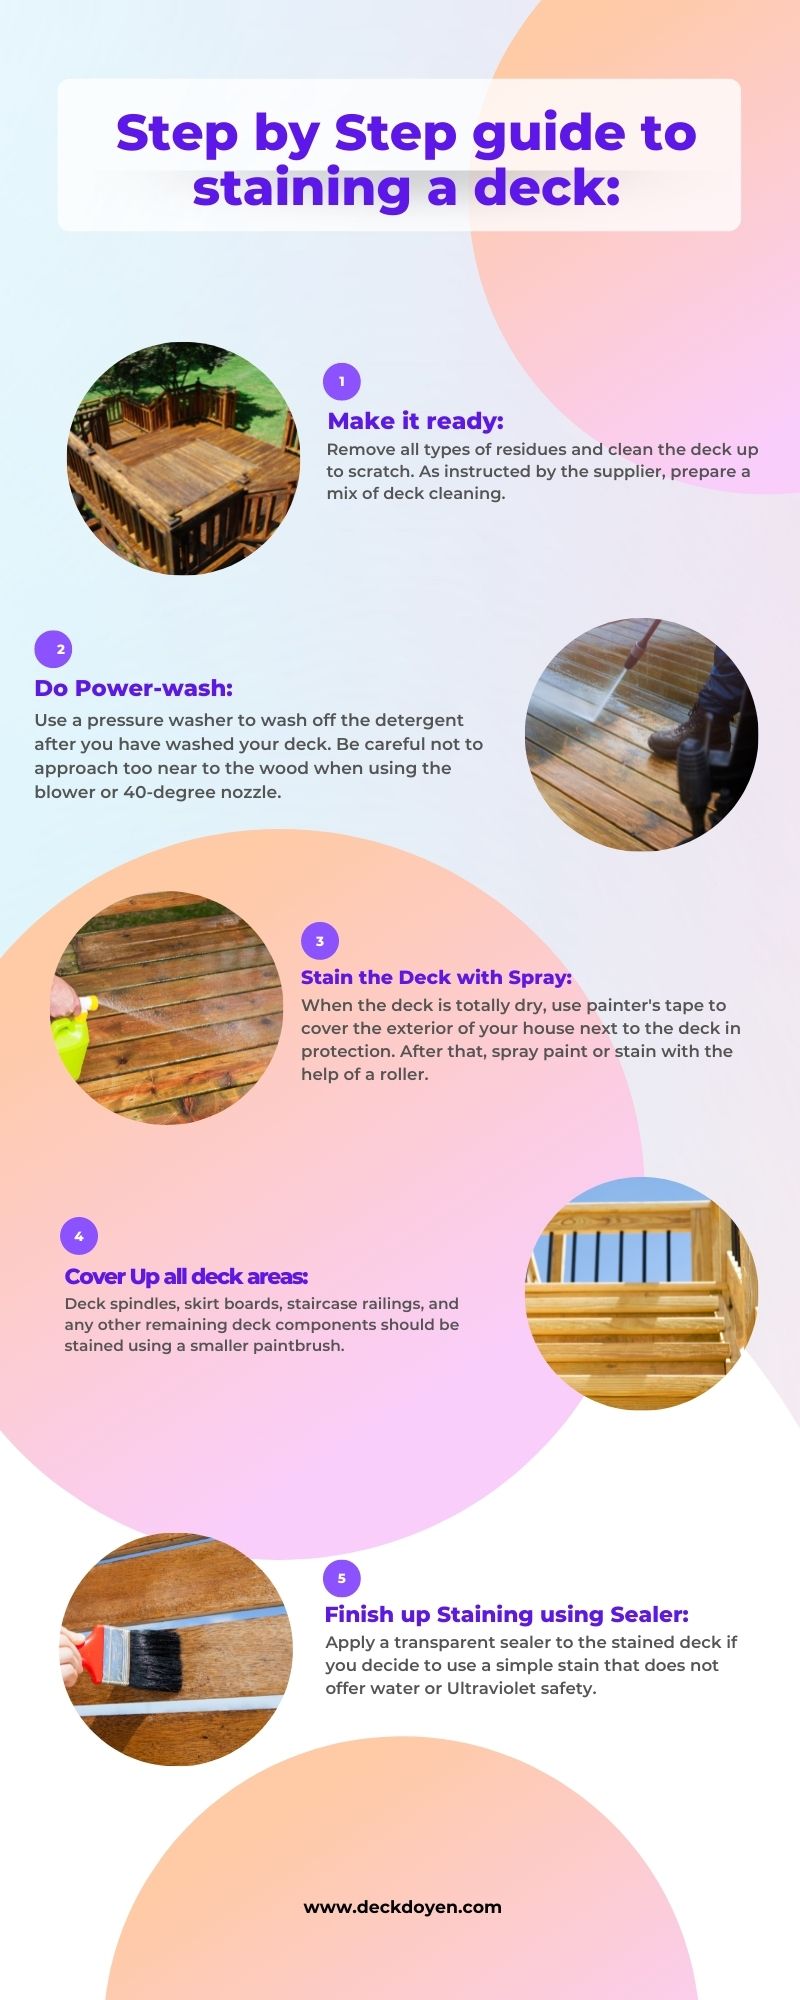 Step by Step guide to staining a deck